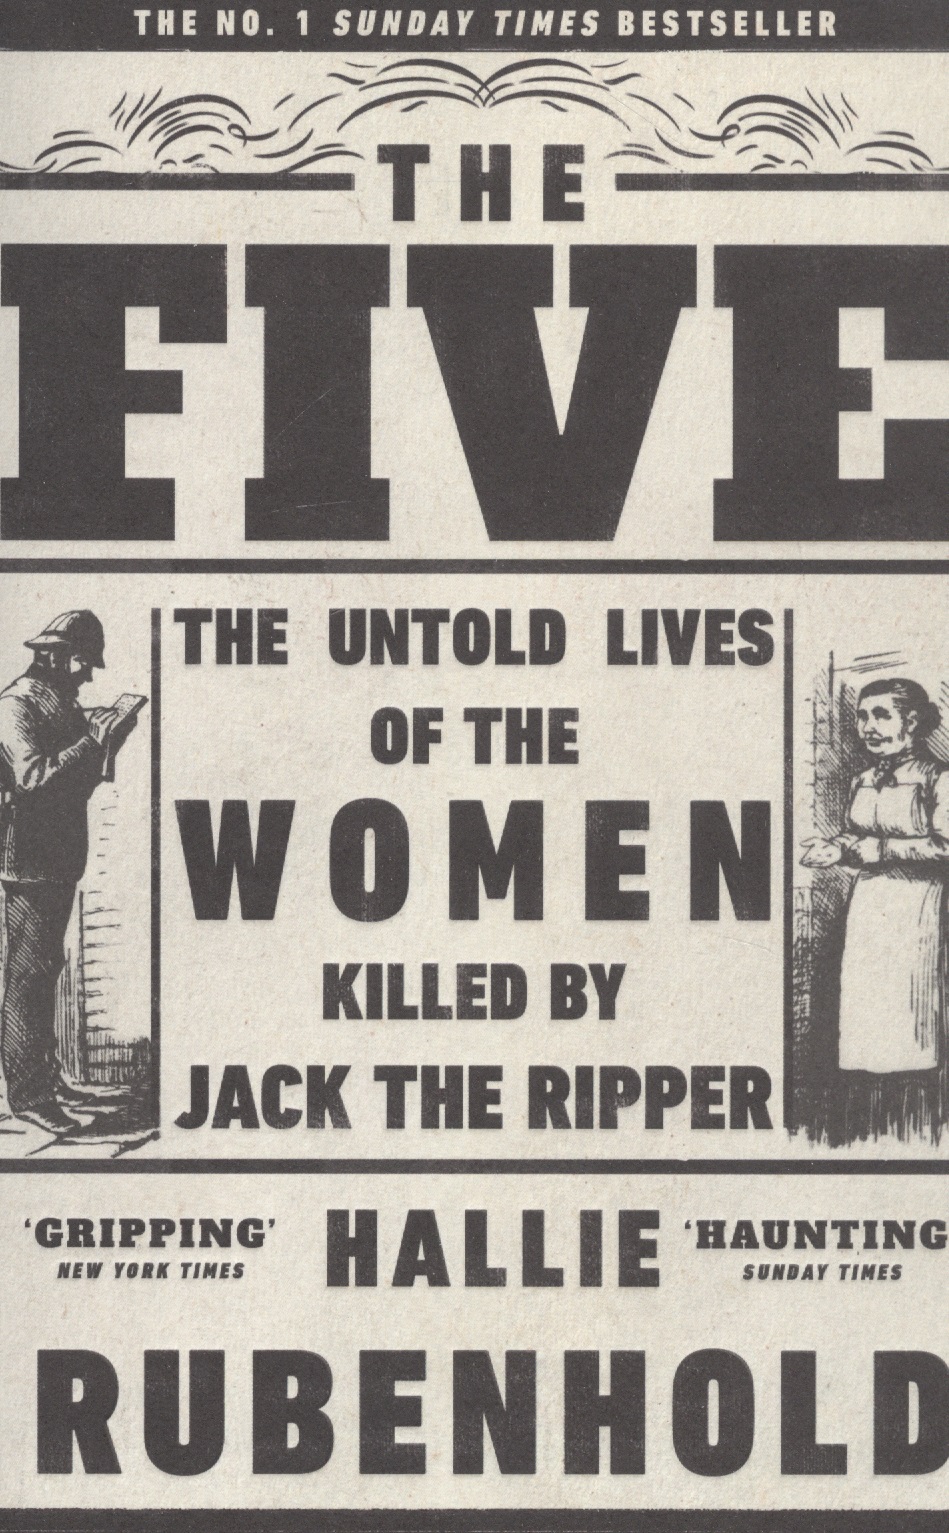 The Five rubenhold hallie the five the untold lives of the women killed by jack the ripper